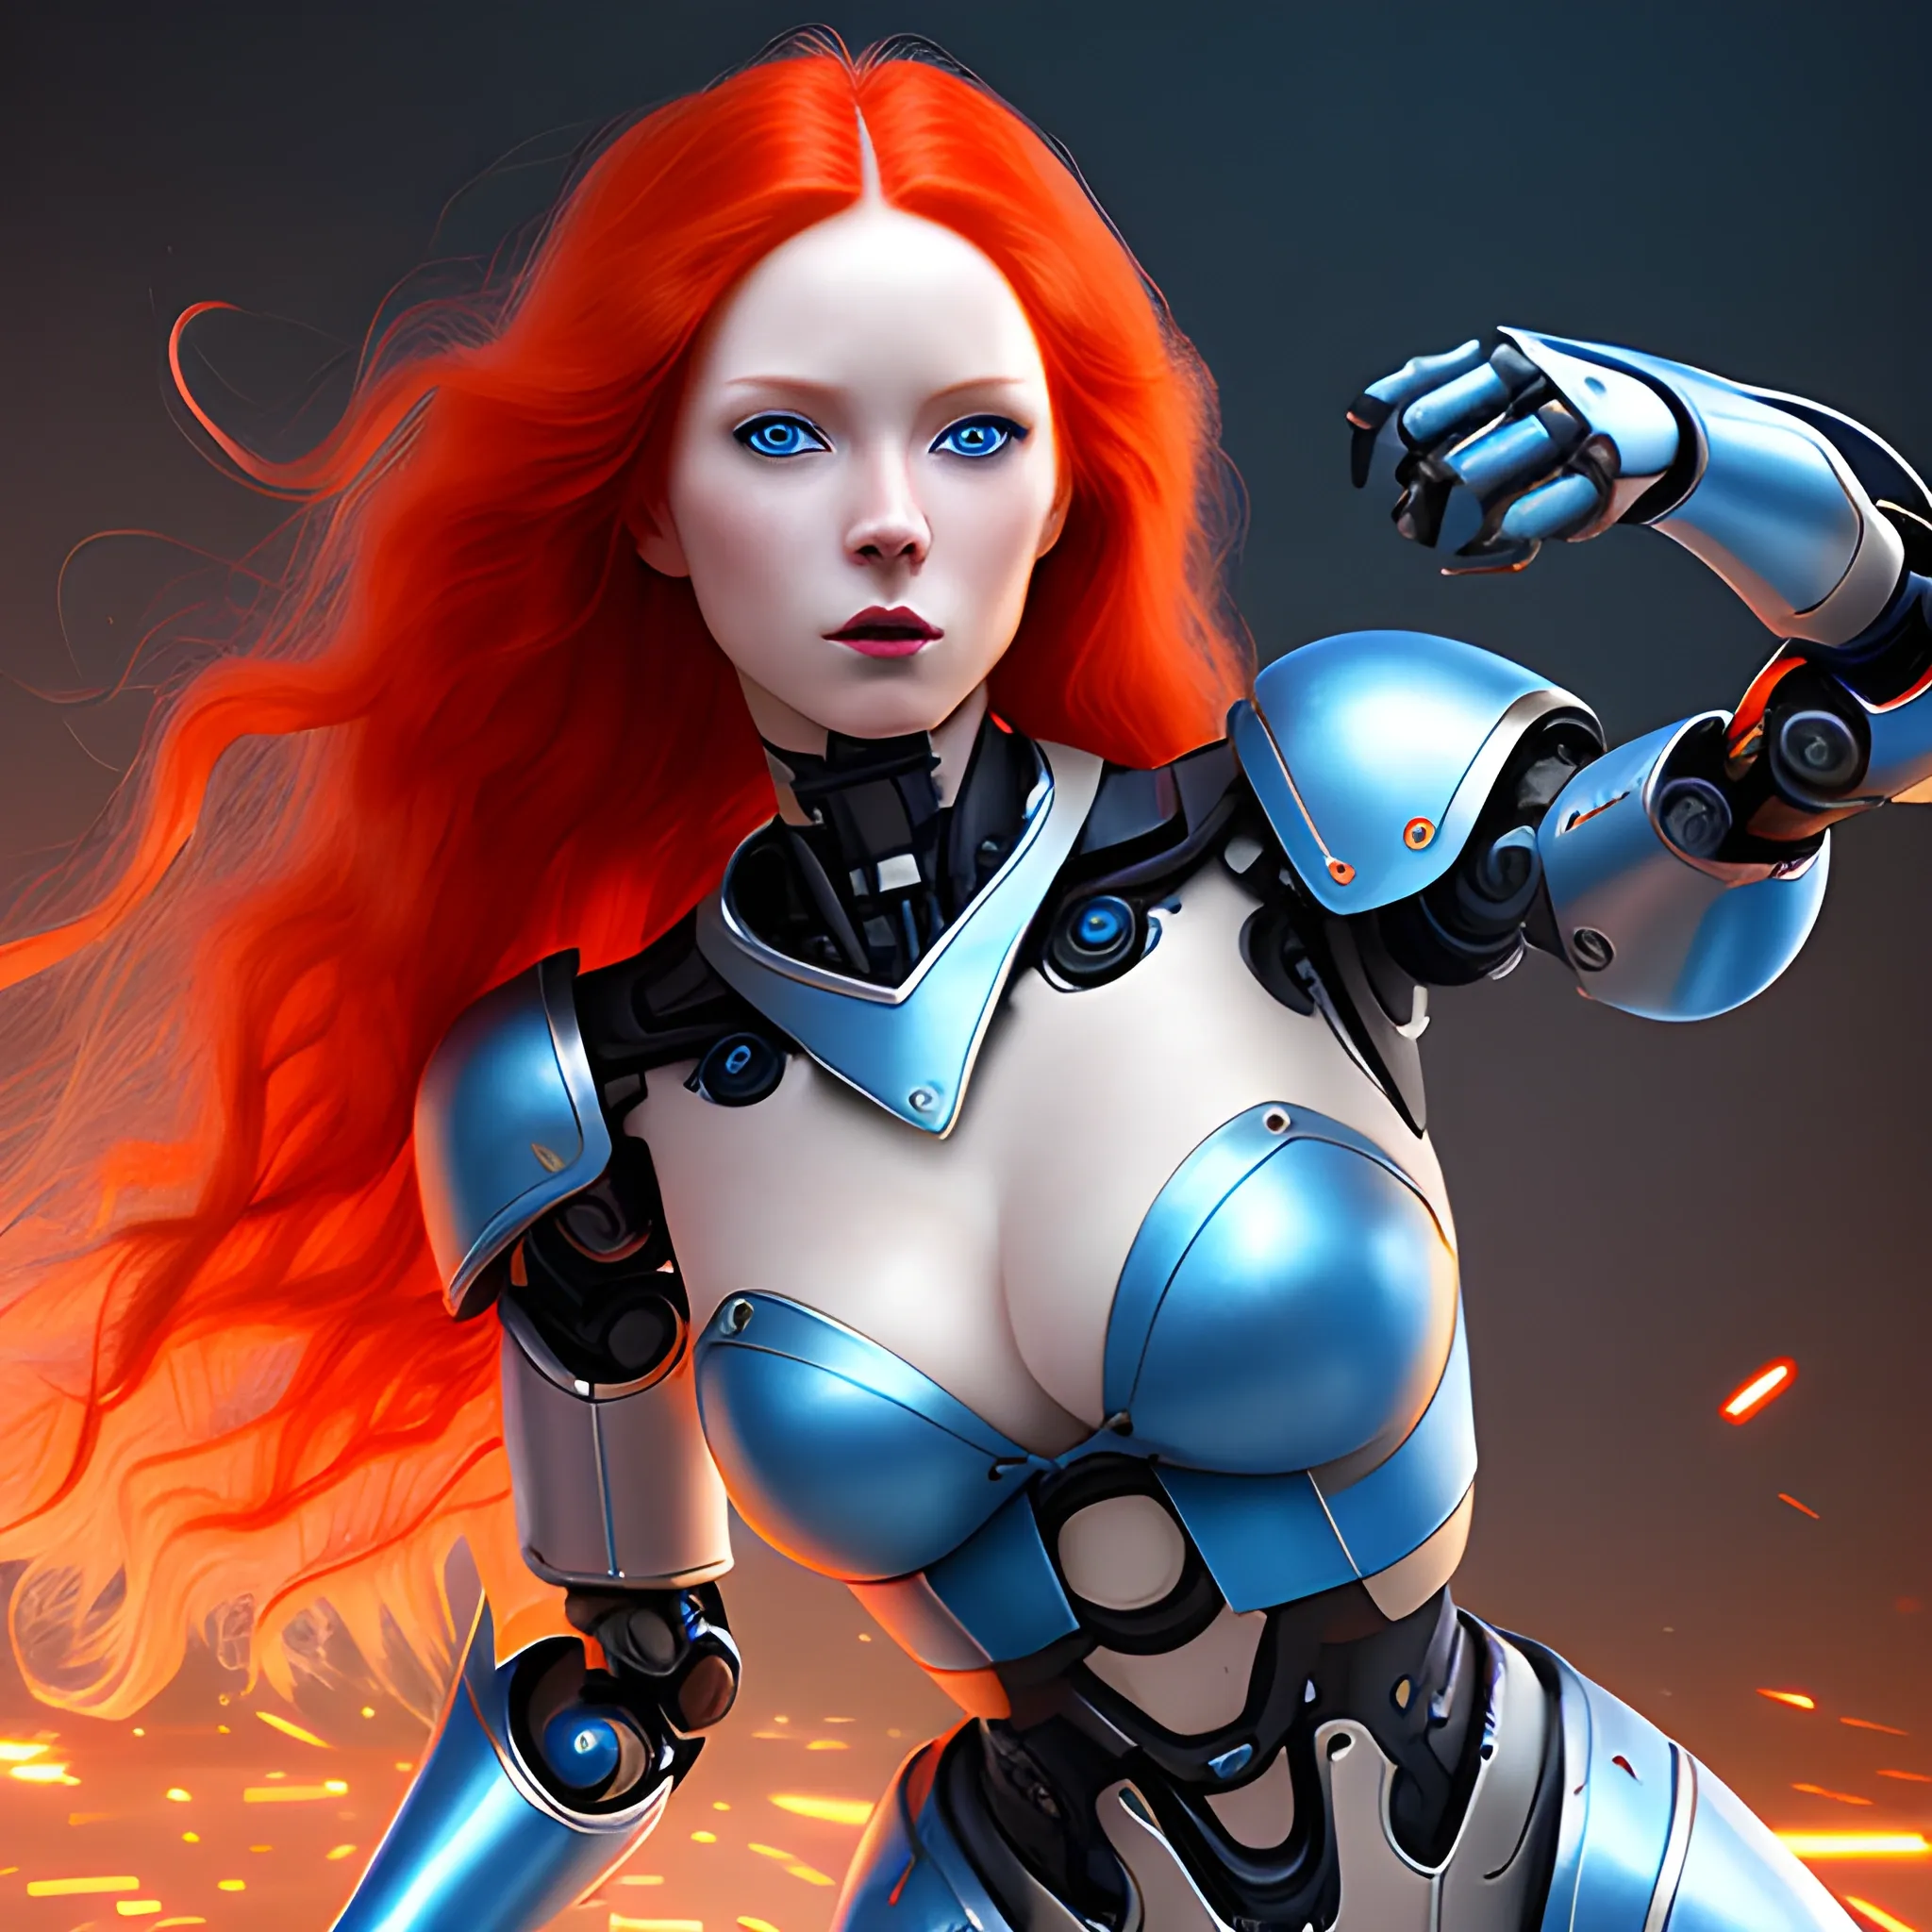 a human type female robot with sexy wardrobe, human face, long red hair, blue eyes, full body escene, battling pose, photorealistic finished, blue armor
